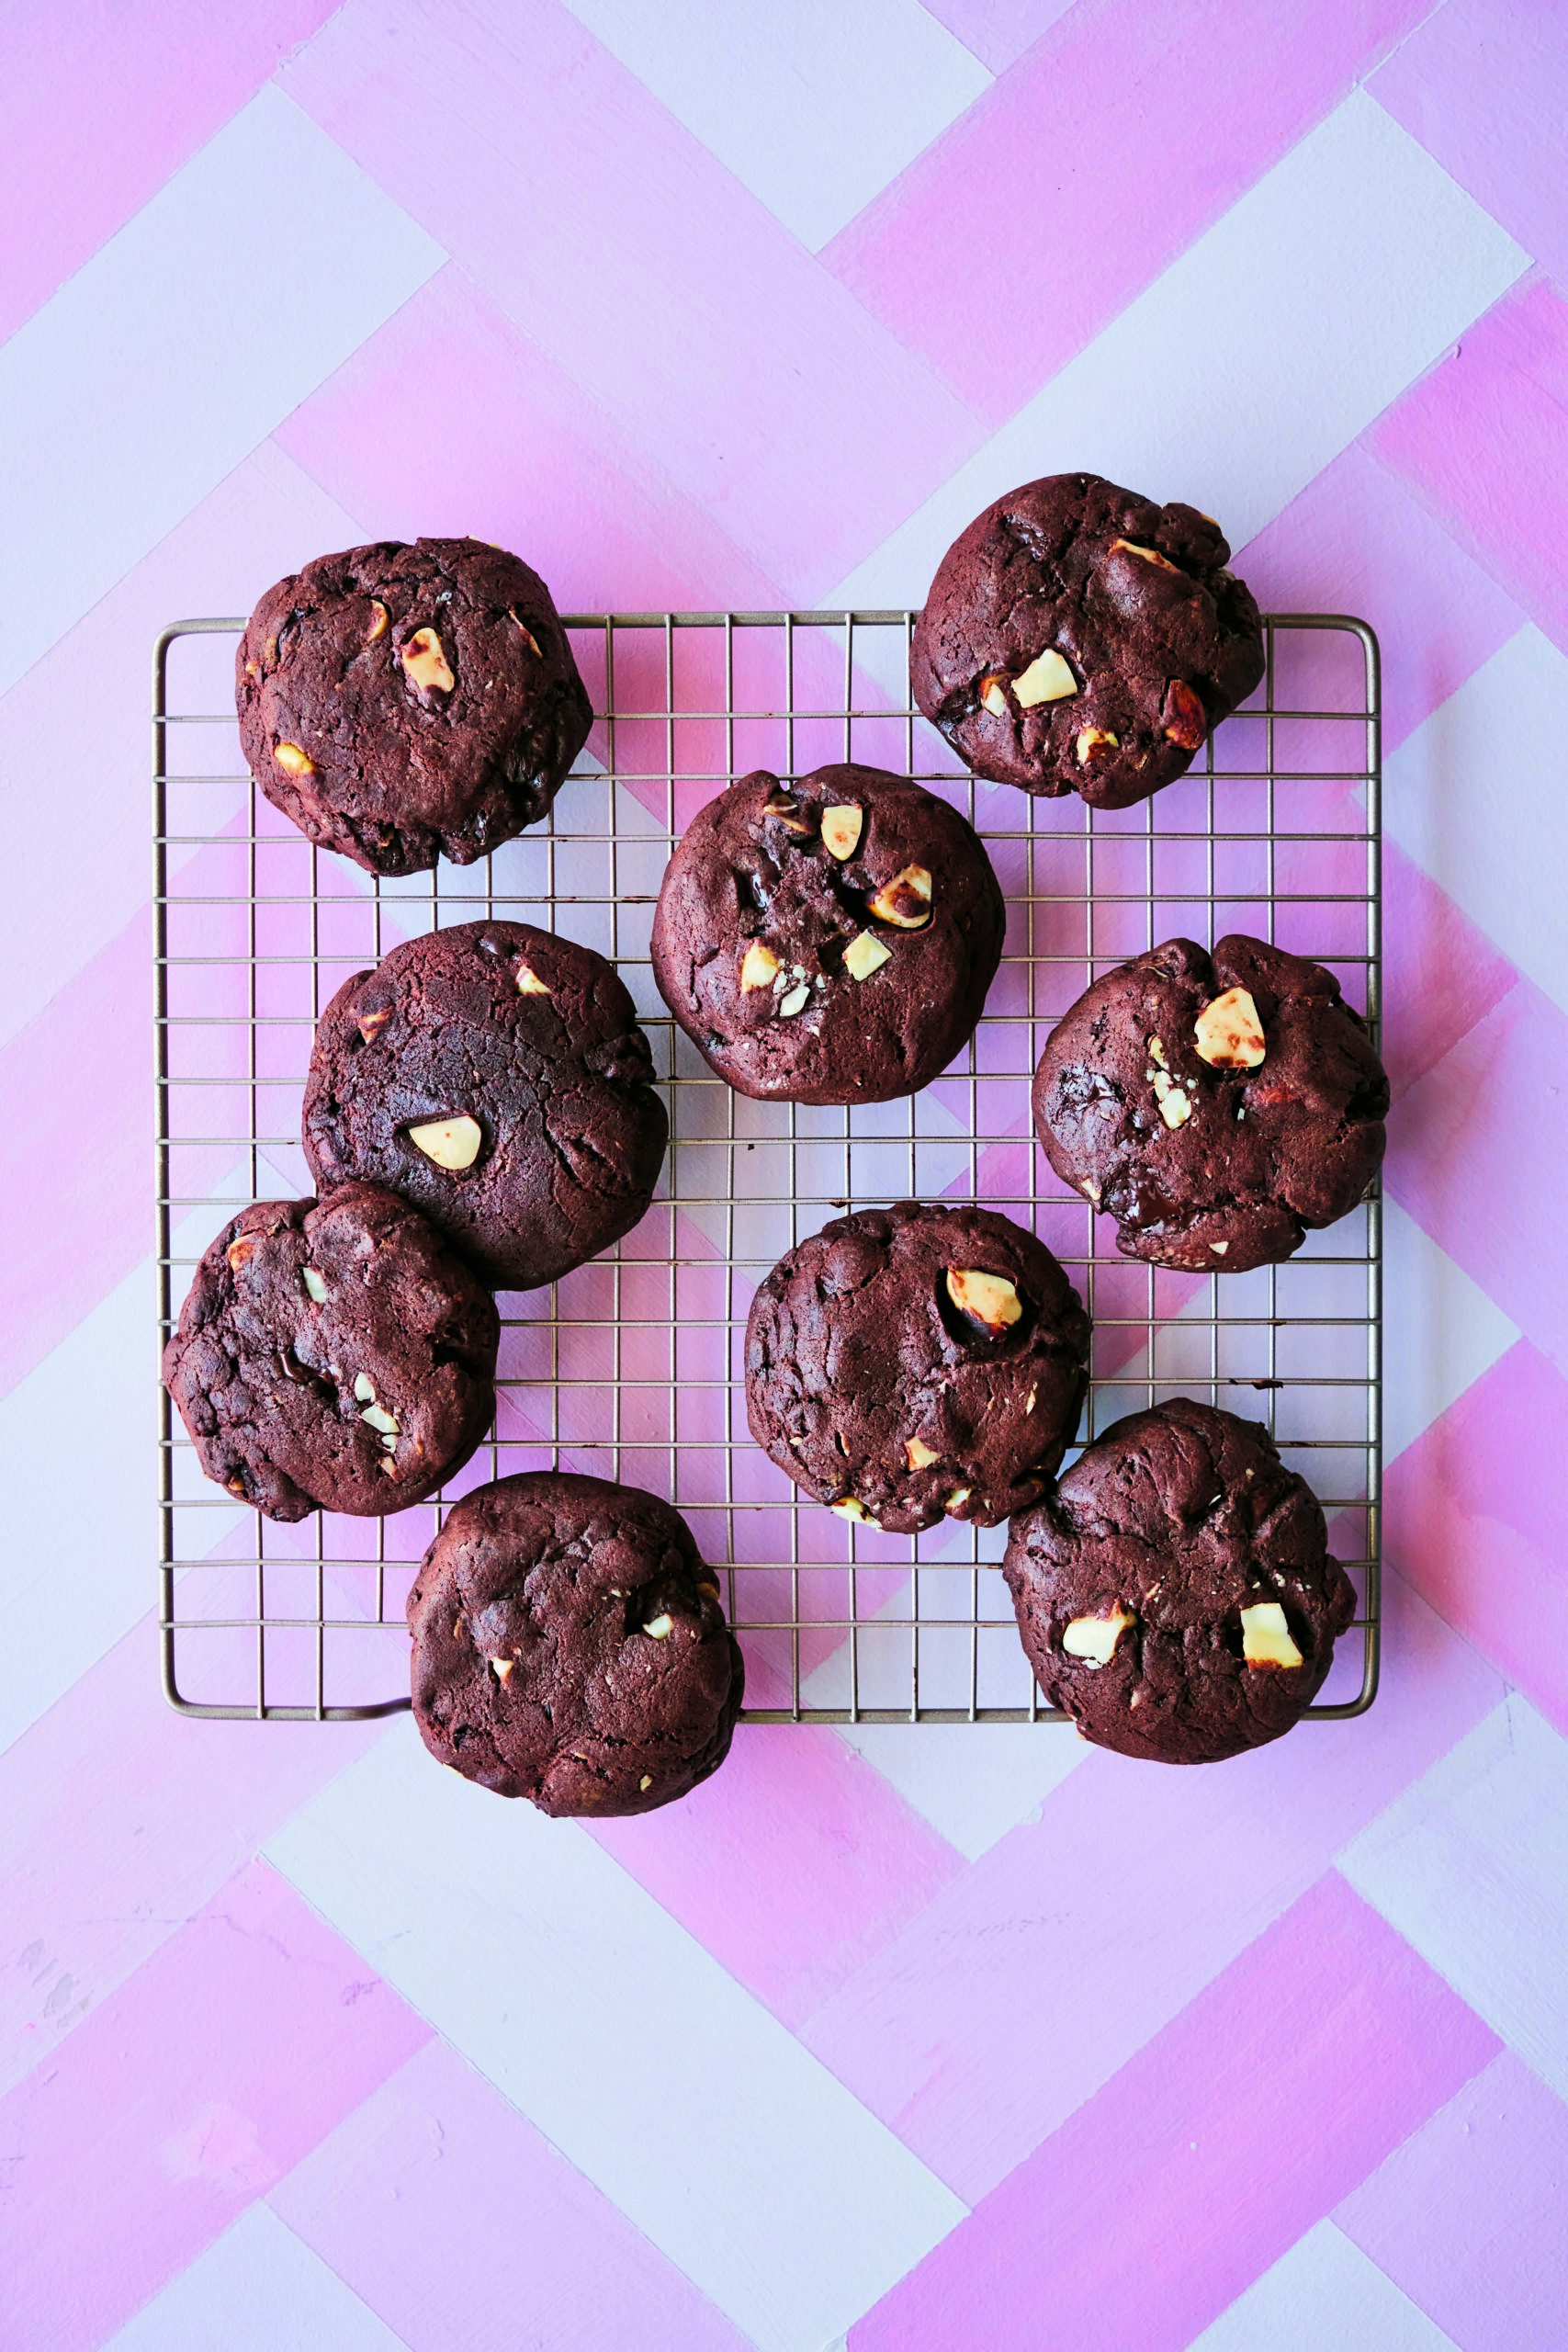 Chocolate, Coconut and Brazil Nut Cookies